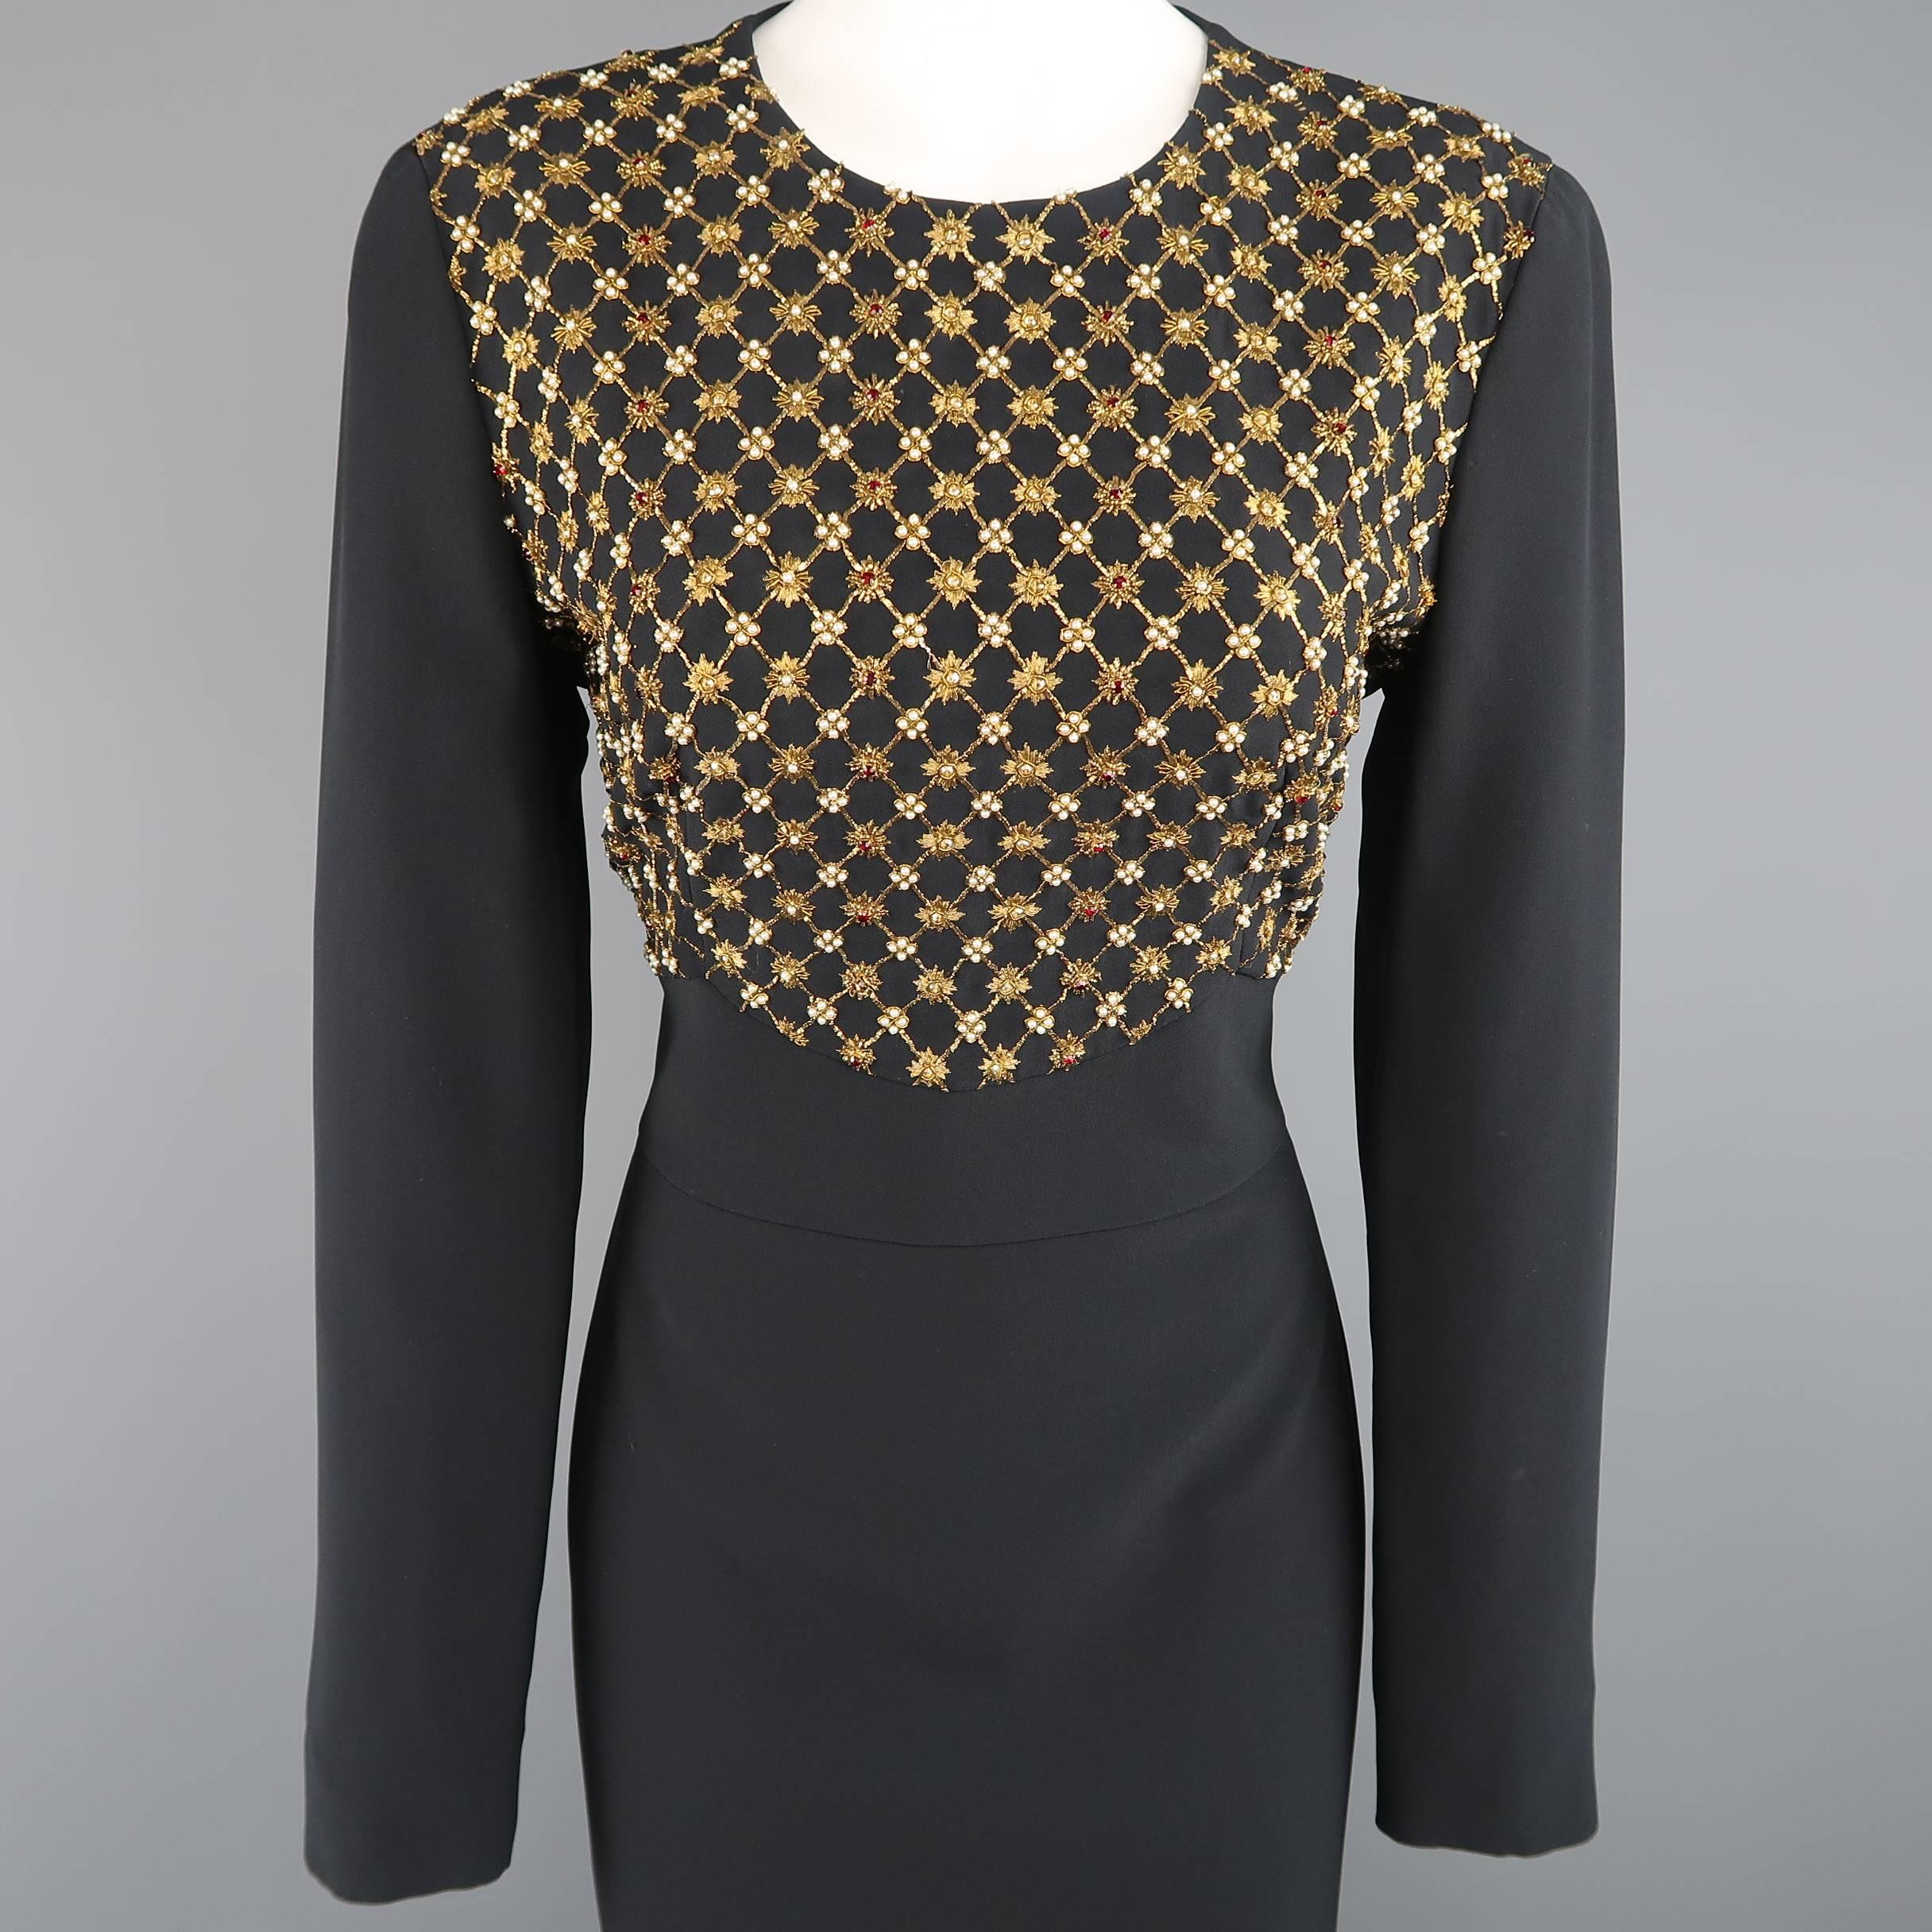 ALEXANDER MCQUEEN cocktail dress comes in black fabric and features a round neckline, long sleeves, midi pencil skirt, and beautiful gold embroidery with crystal and pearl beadwork throughout the chest. Hand crafted in Italy.
 
New with